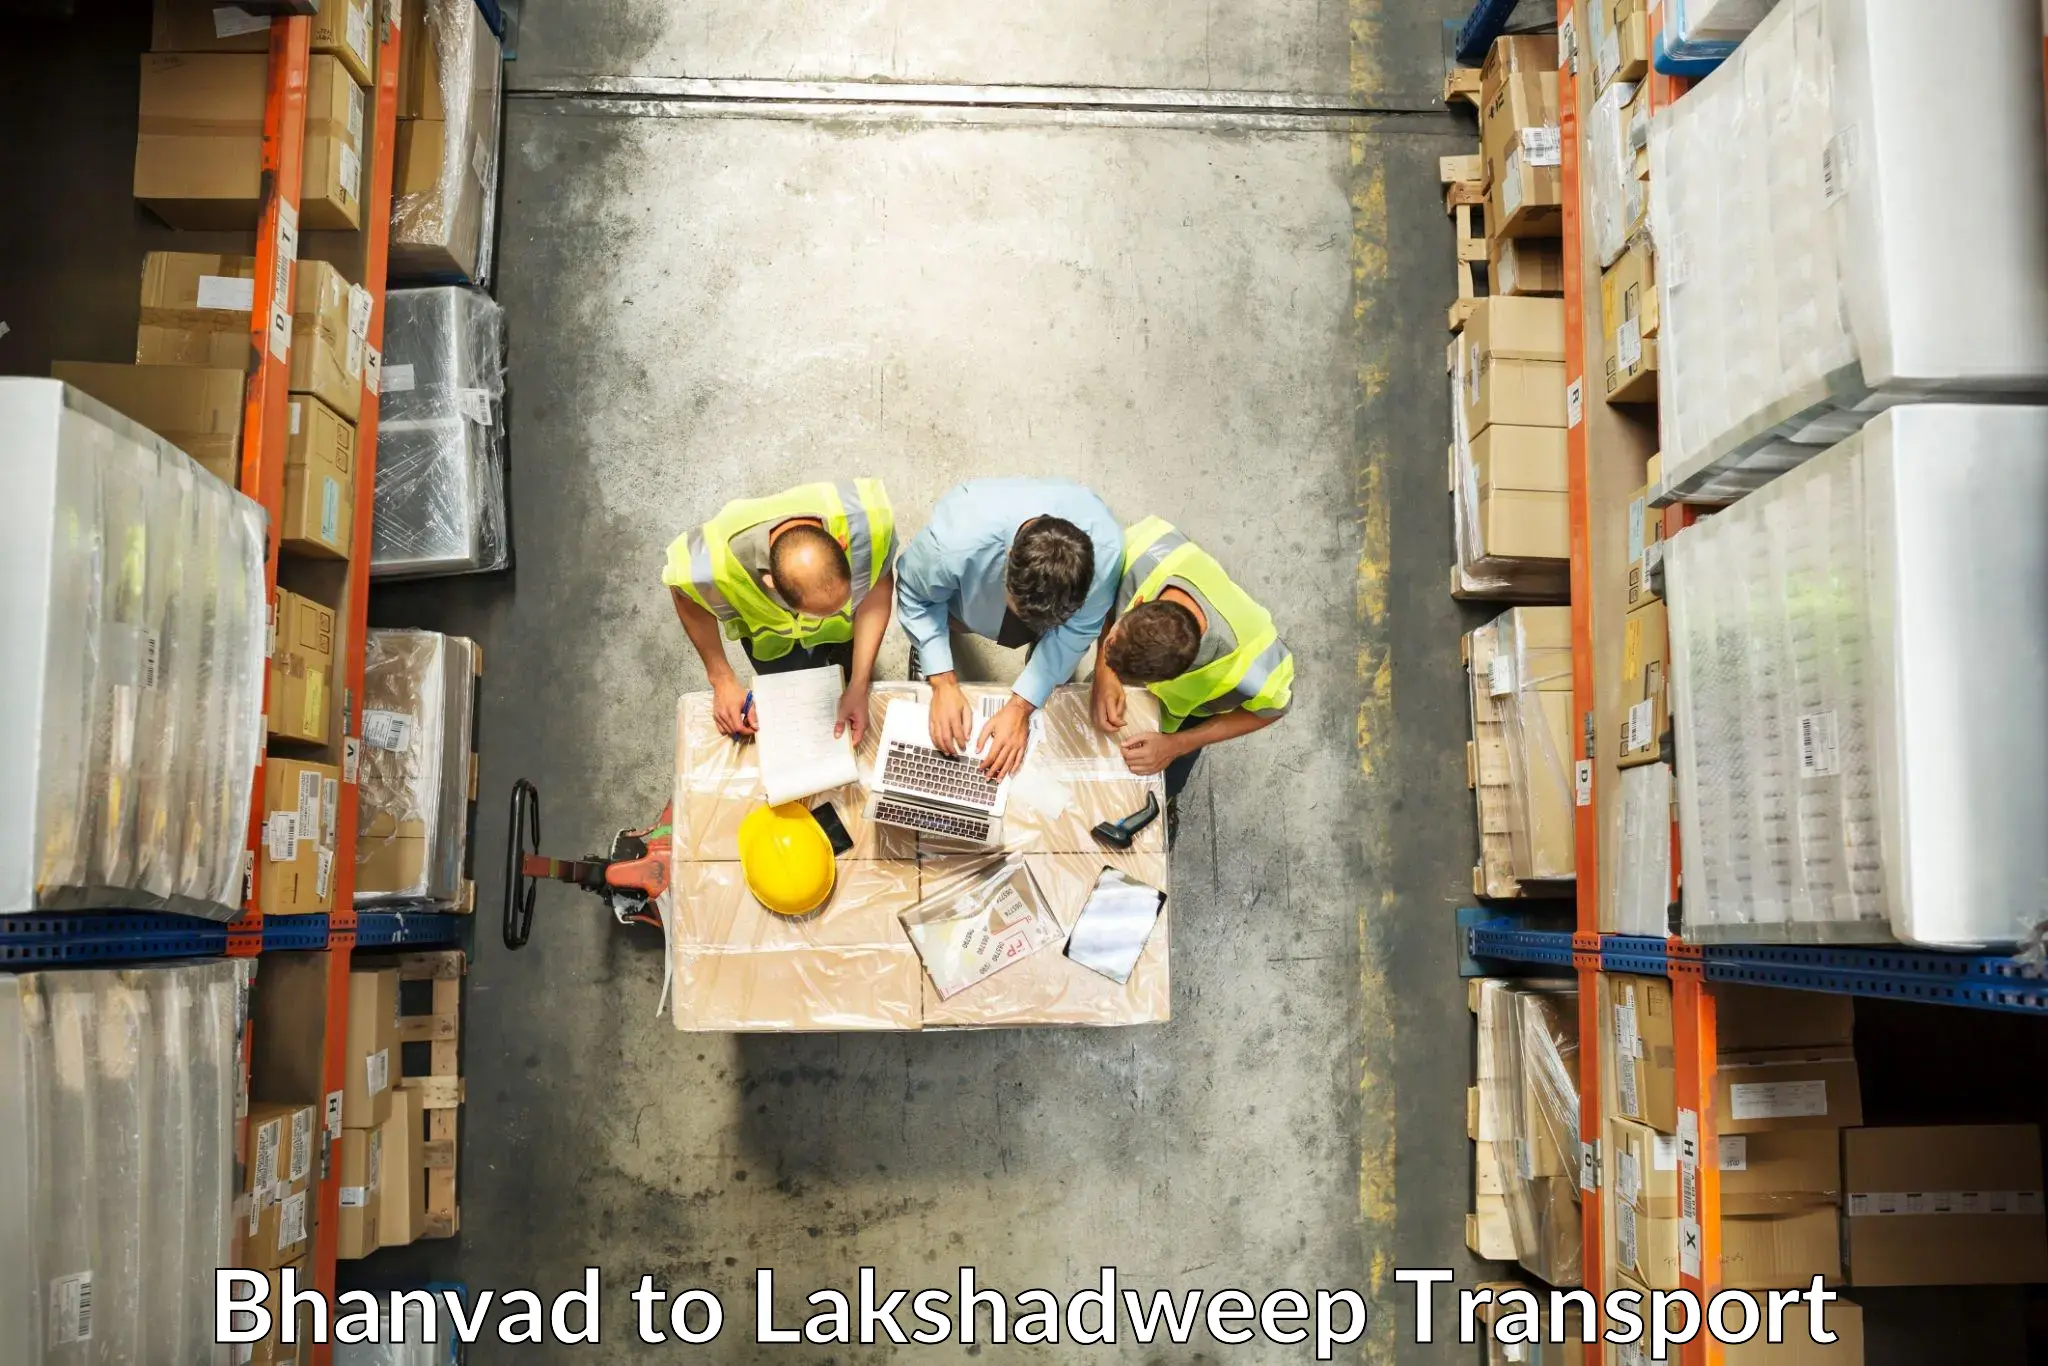 India truck logistics services Bhanvad to Lakshadweep